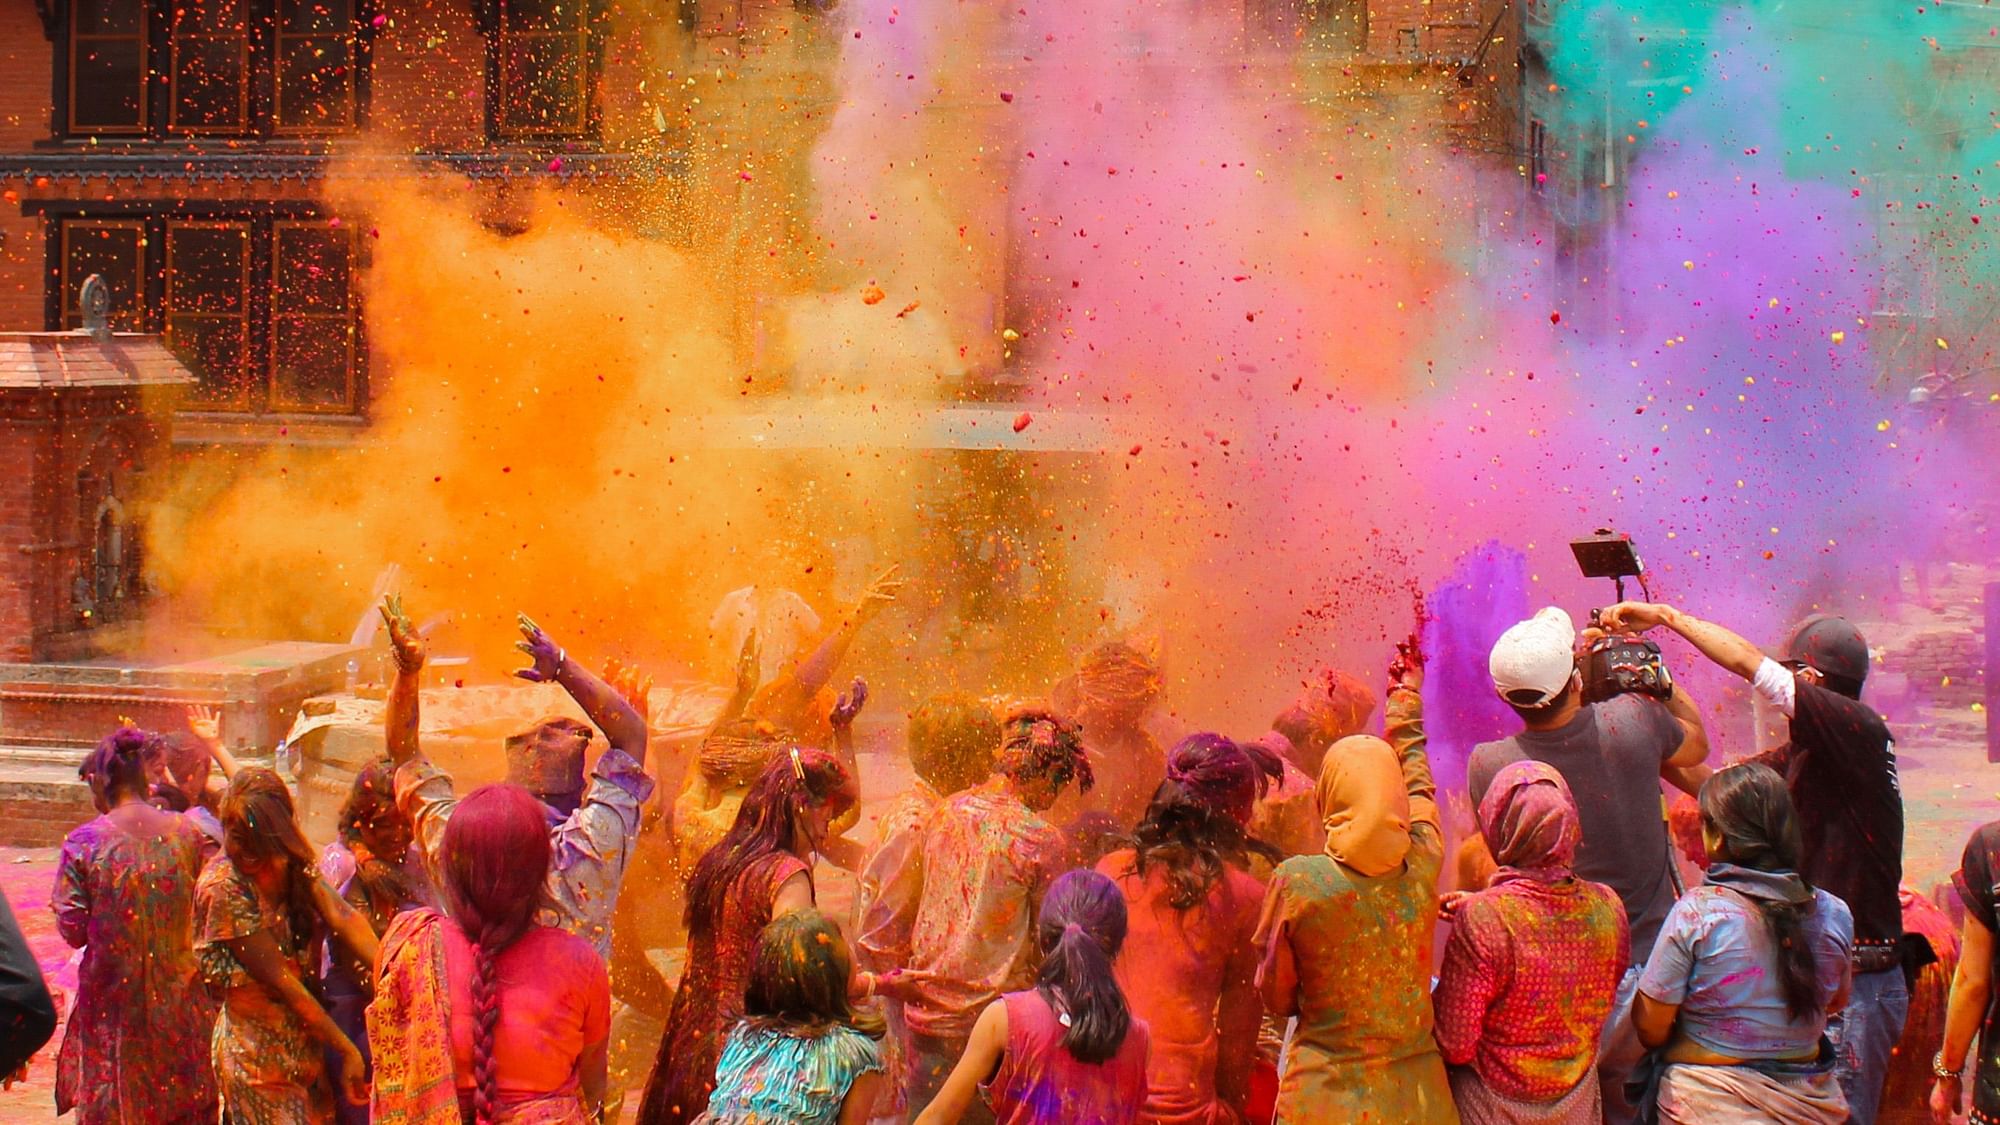 When is Holi 2022?